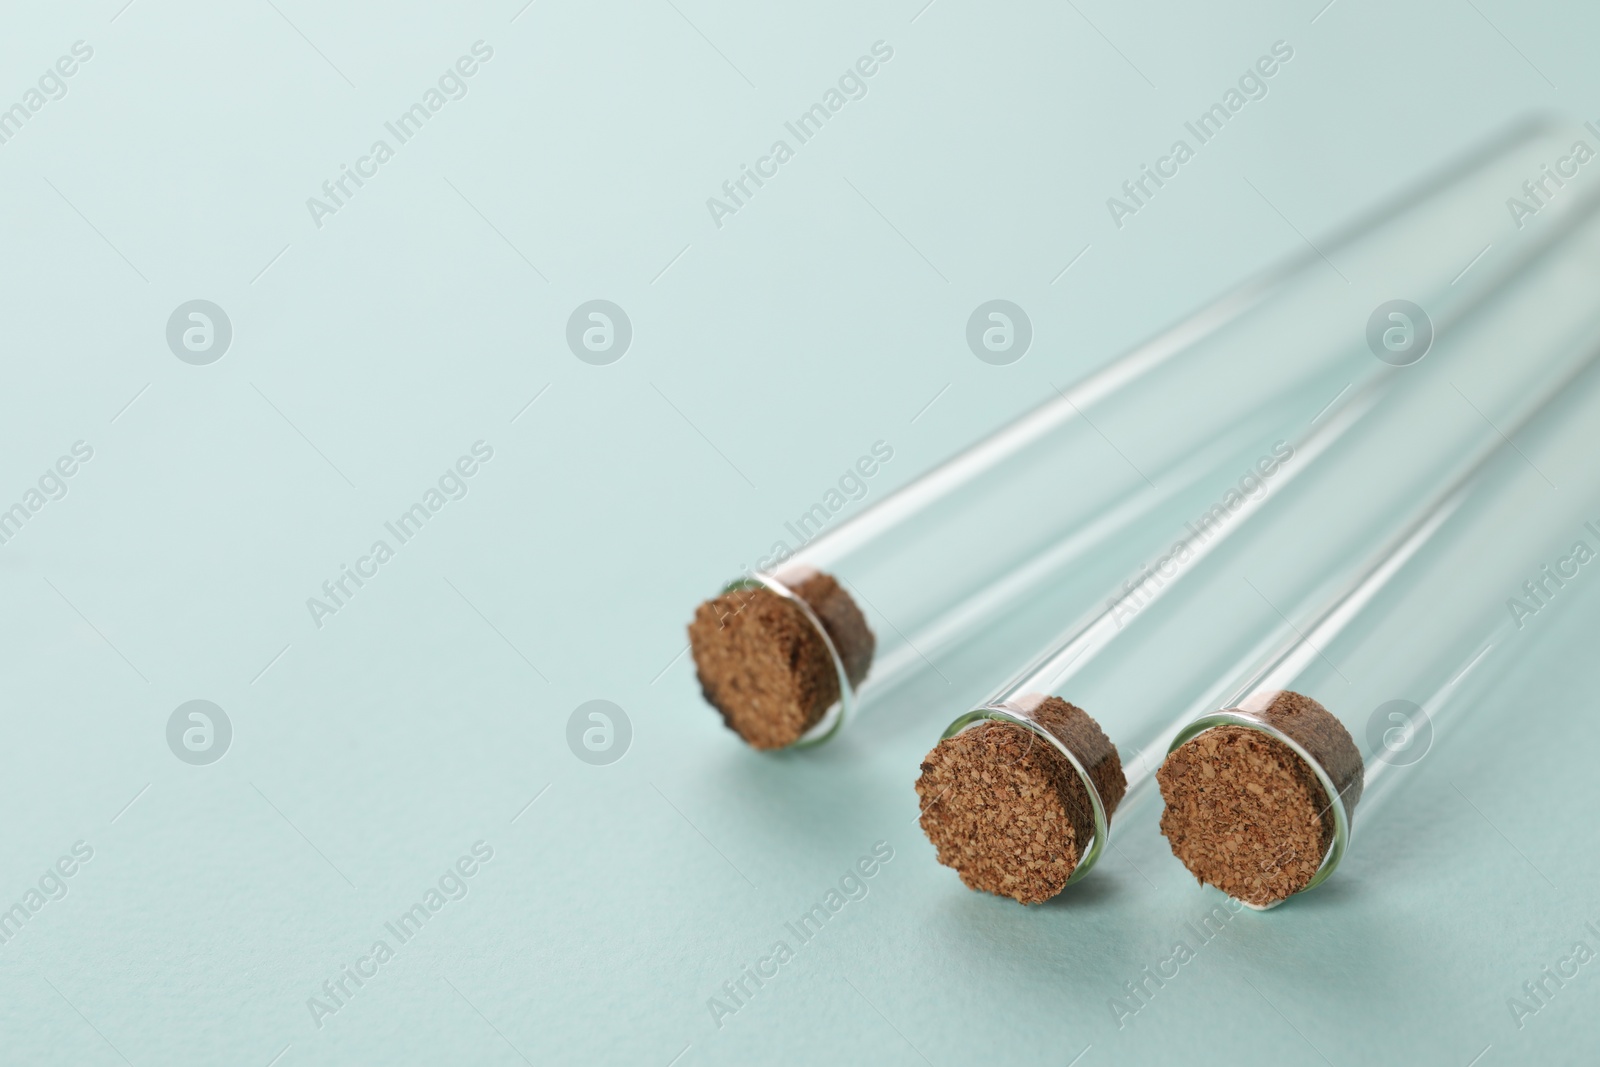 Photo of Test tubes on turquoise background, closeup and space for text. Laboratory glassware